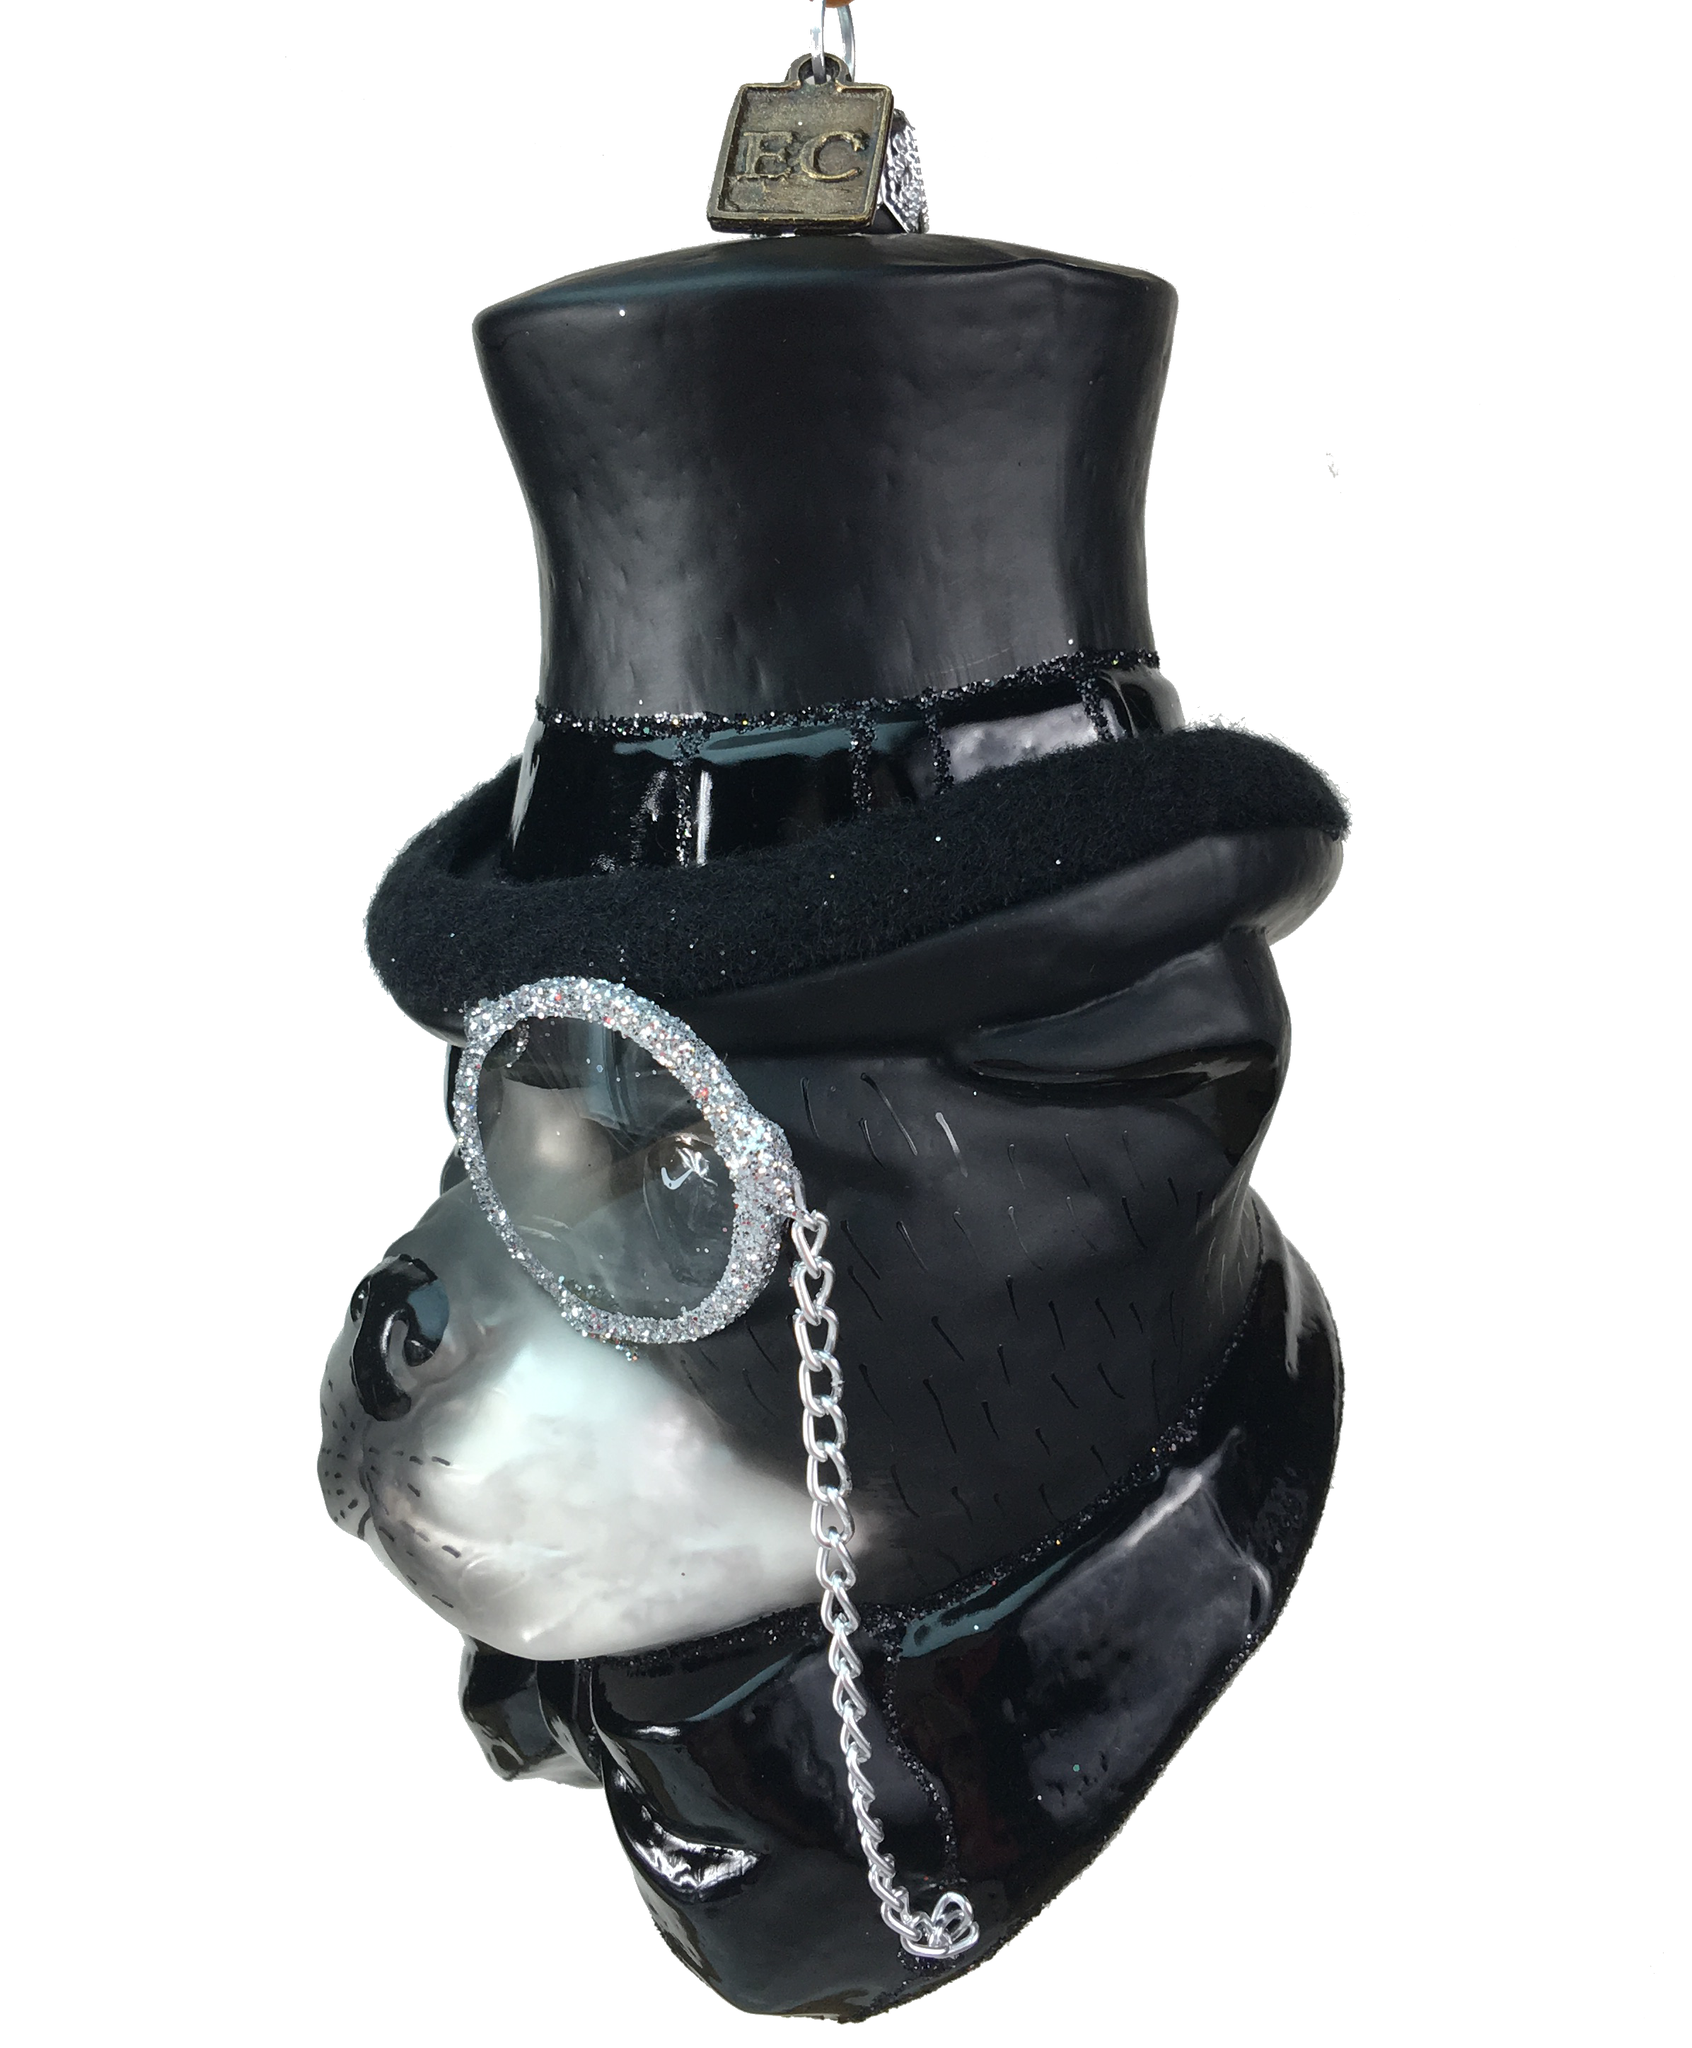 Bulldog in Top Hat & Monocle Ornament From Poland